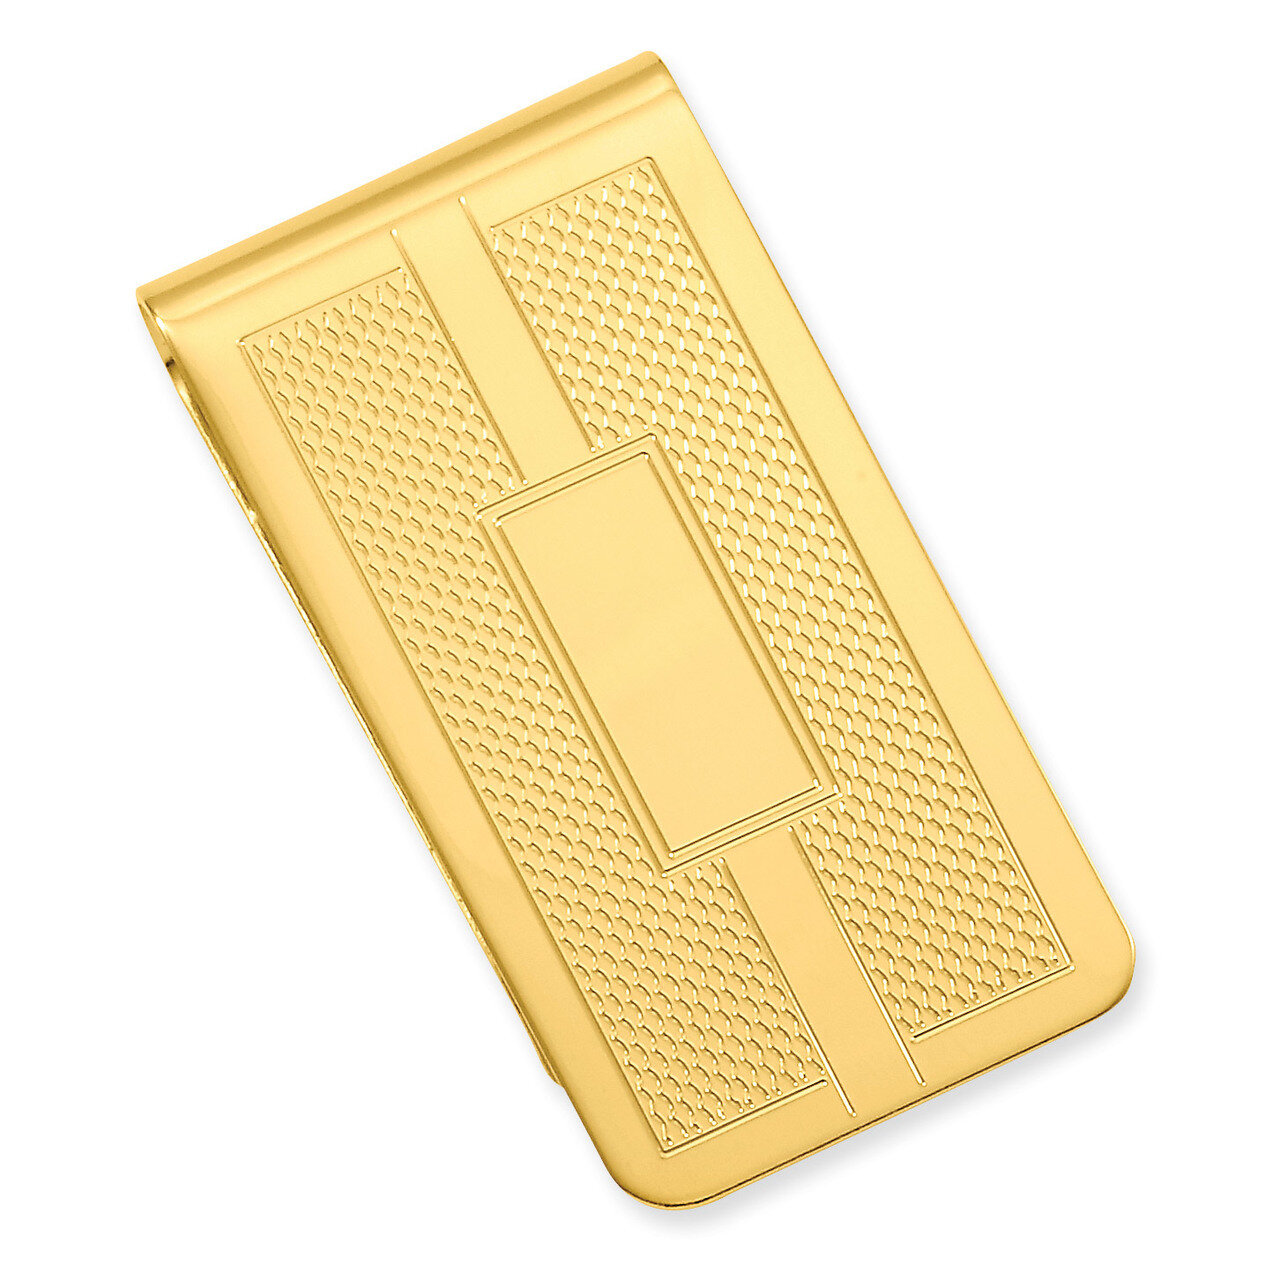 Honey Comb & Square Engravable Money Clip Gold-plated KW688